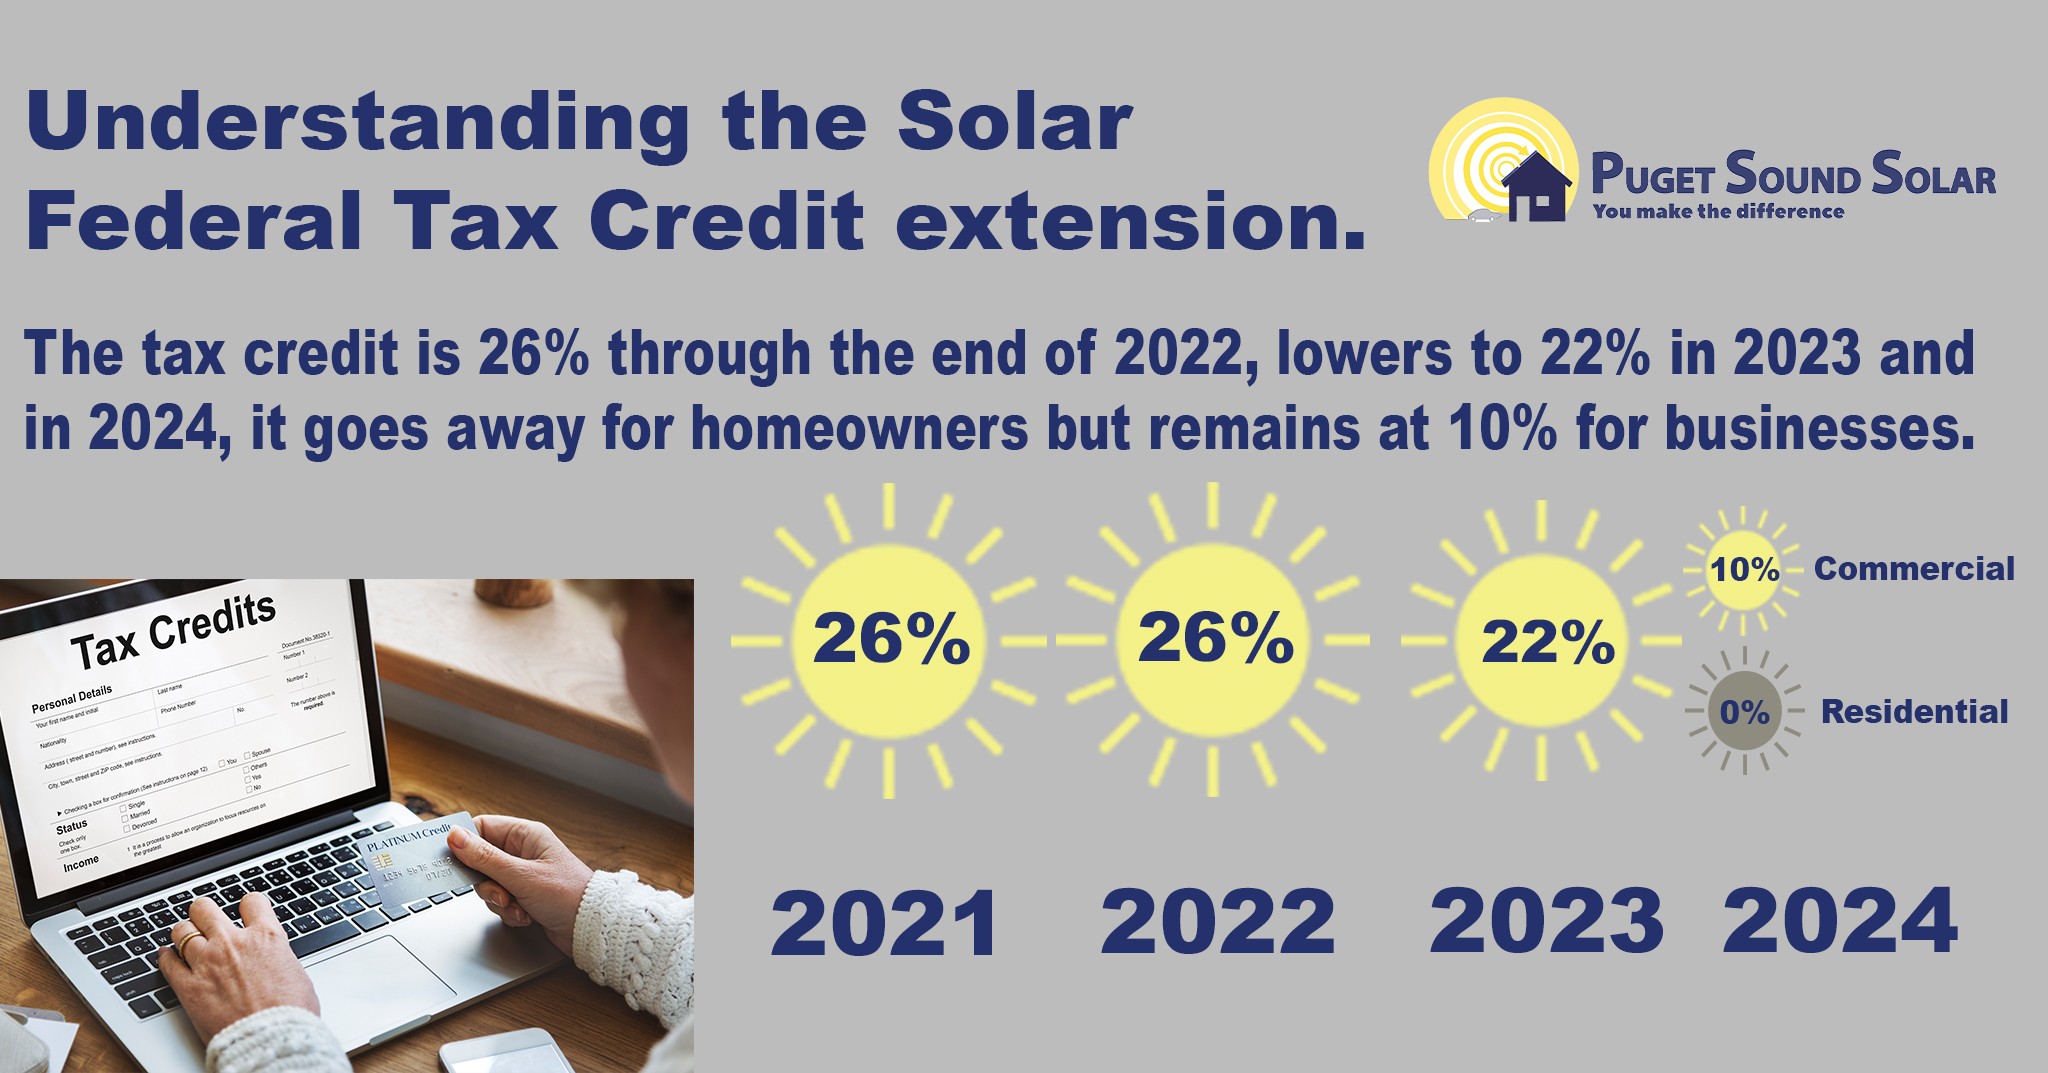 Understanding the Federal Solar Tax Credit Changes In 2021